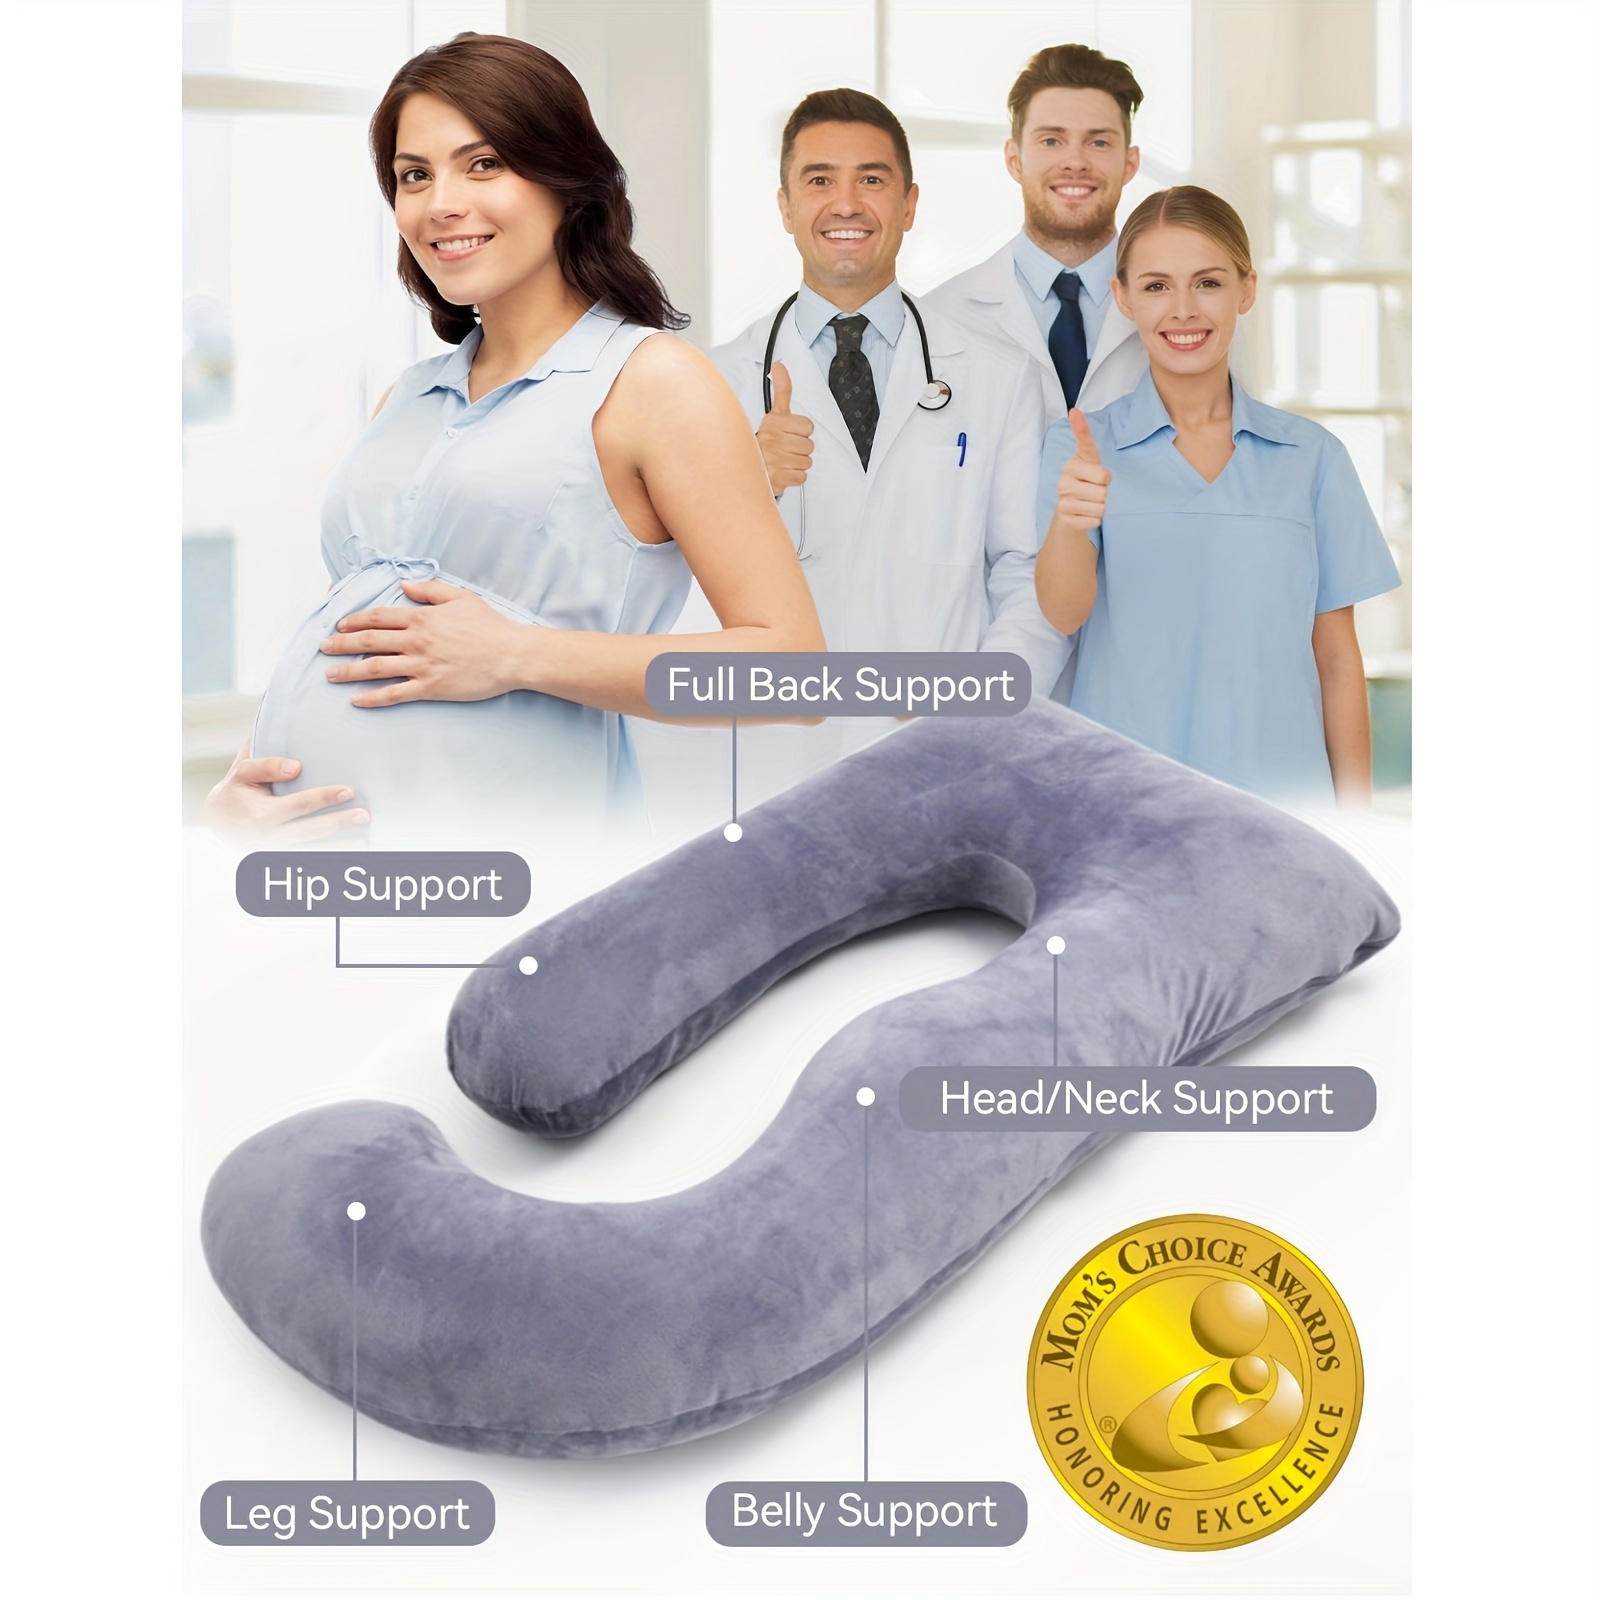 Pregnancy Pillow U Shaped , Maternity Eeping Pillow Full Body Pillow With  Removable Cover